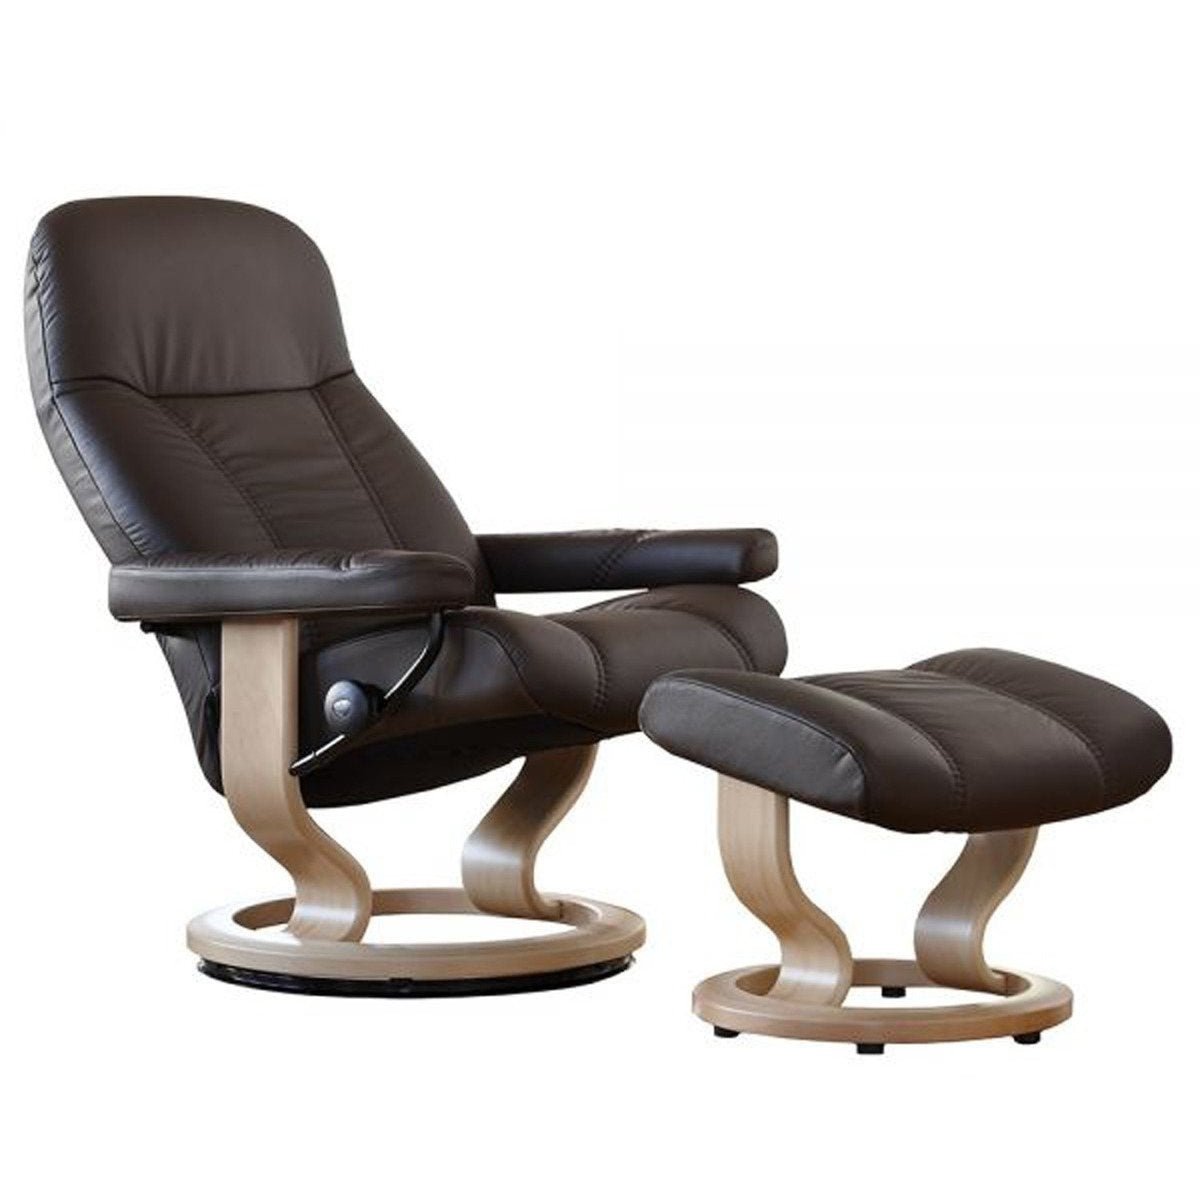 Stressless Consul Large Recliner with Stool